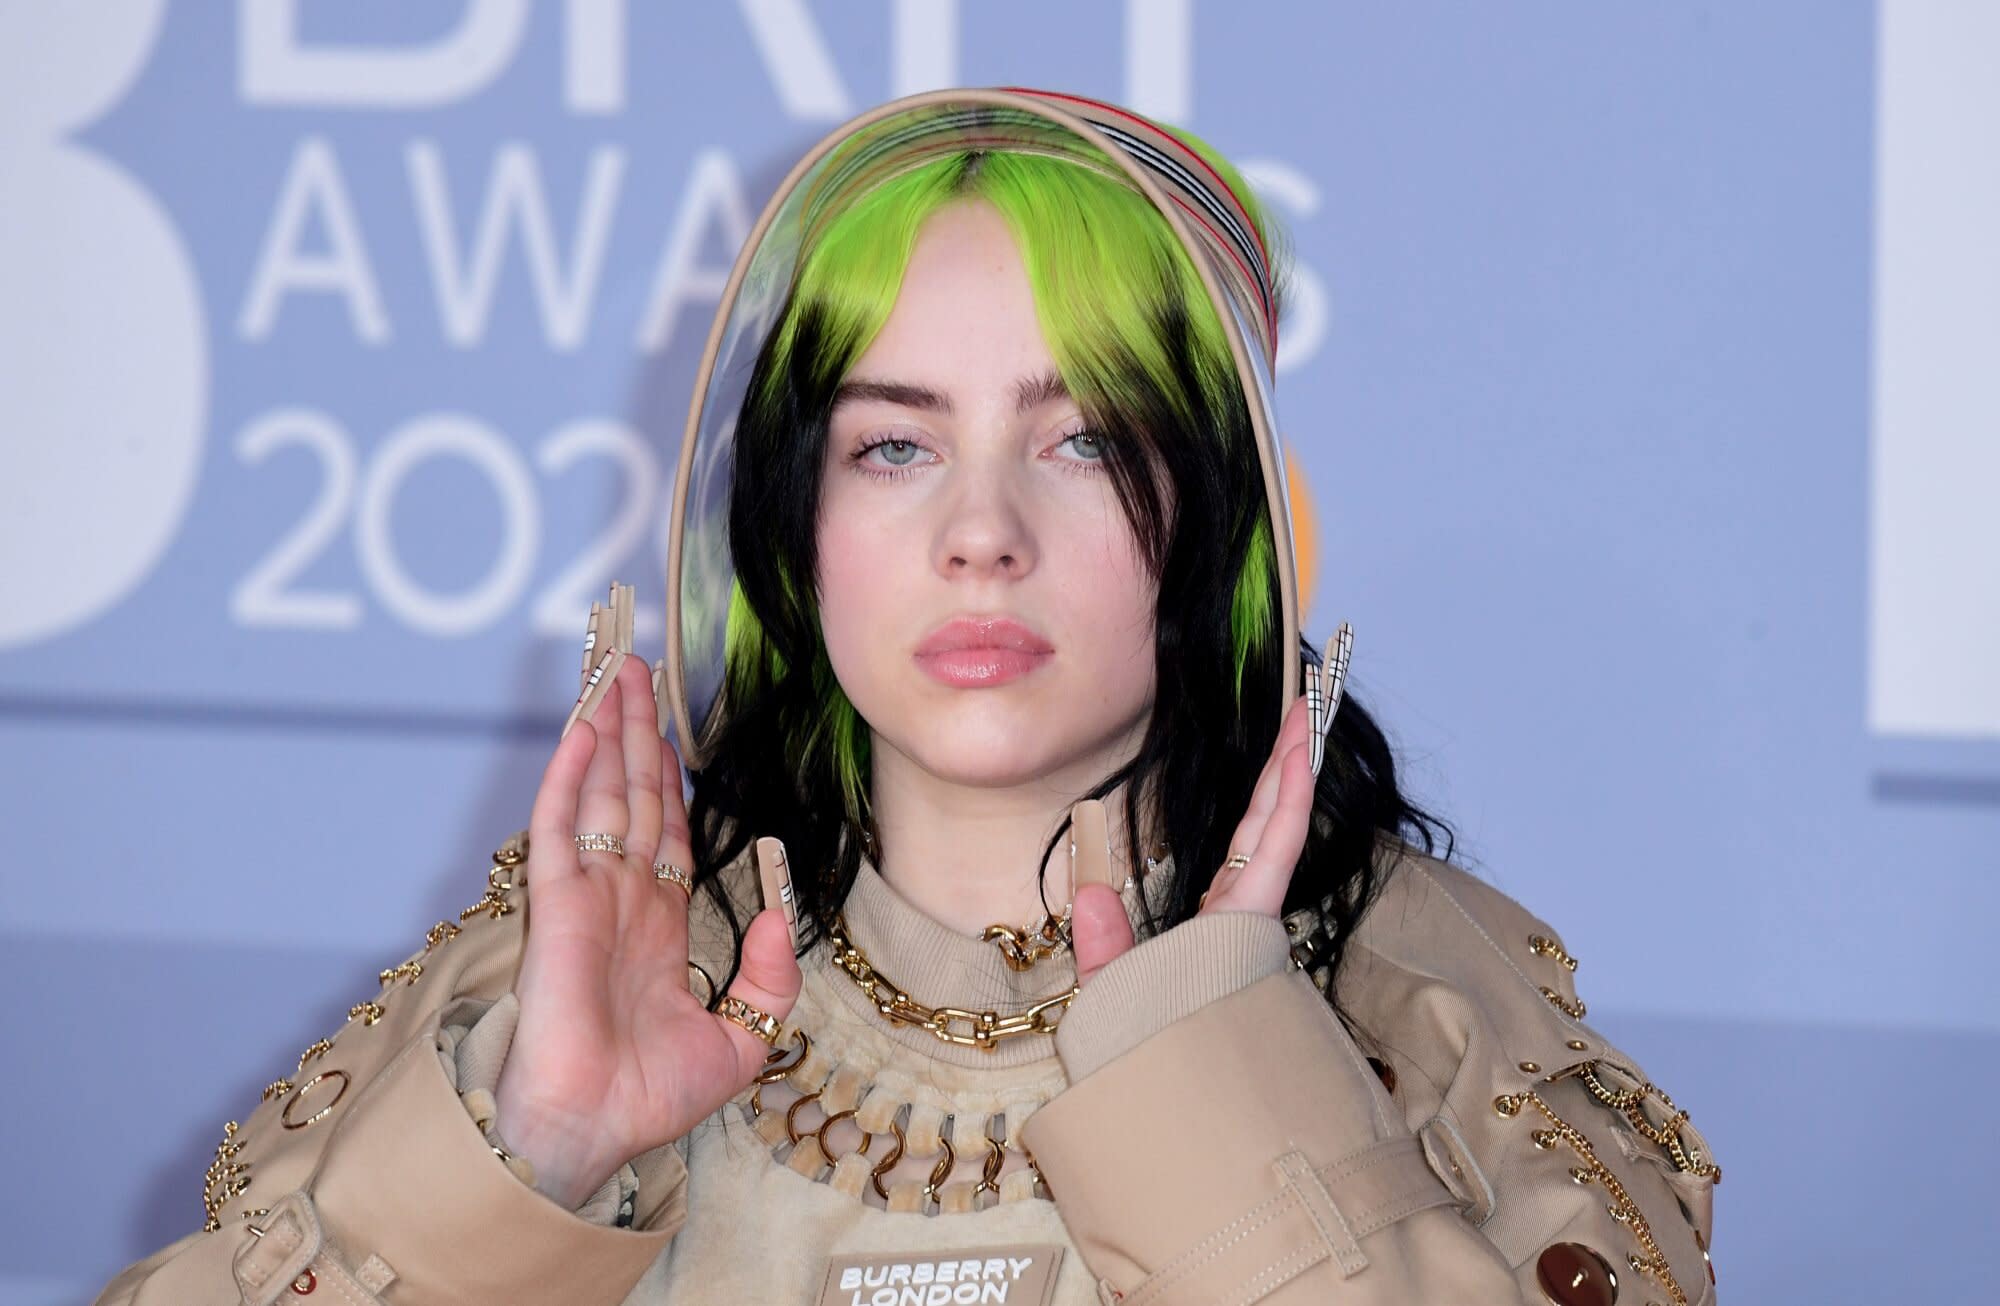 Billie Eilish Apologized For A Resurfaced Video Of Her Using A Racial Slur